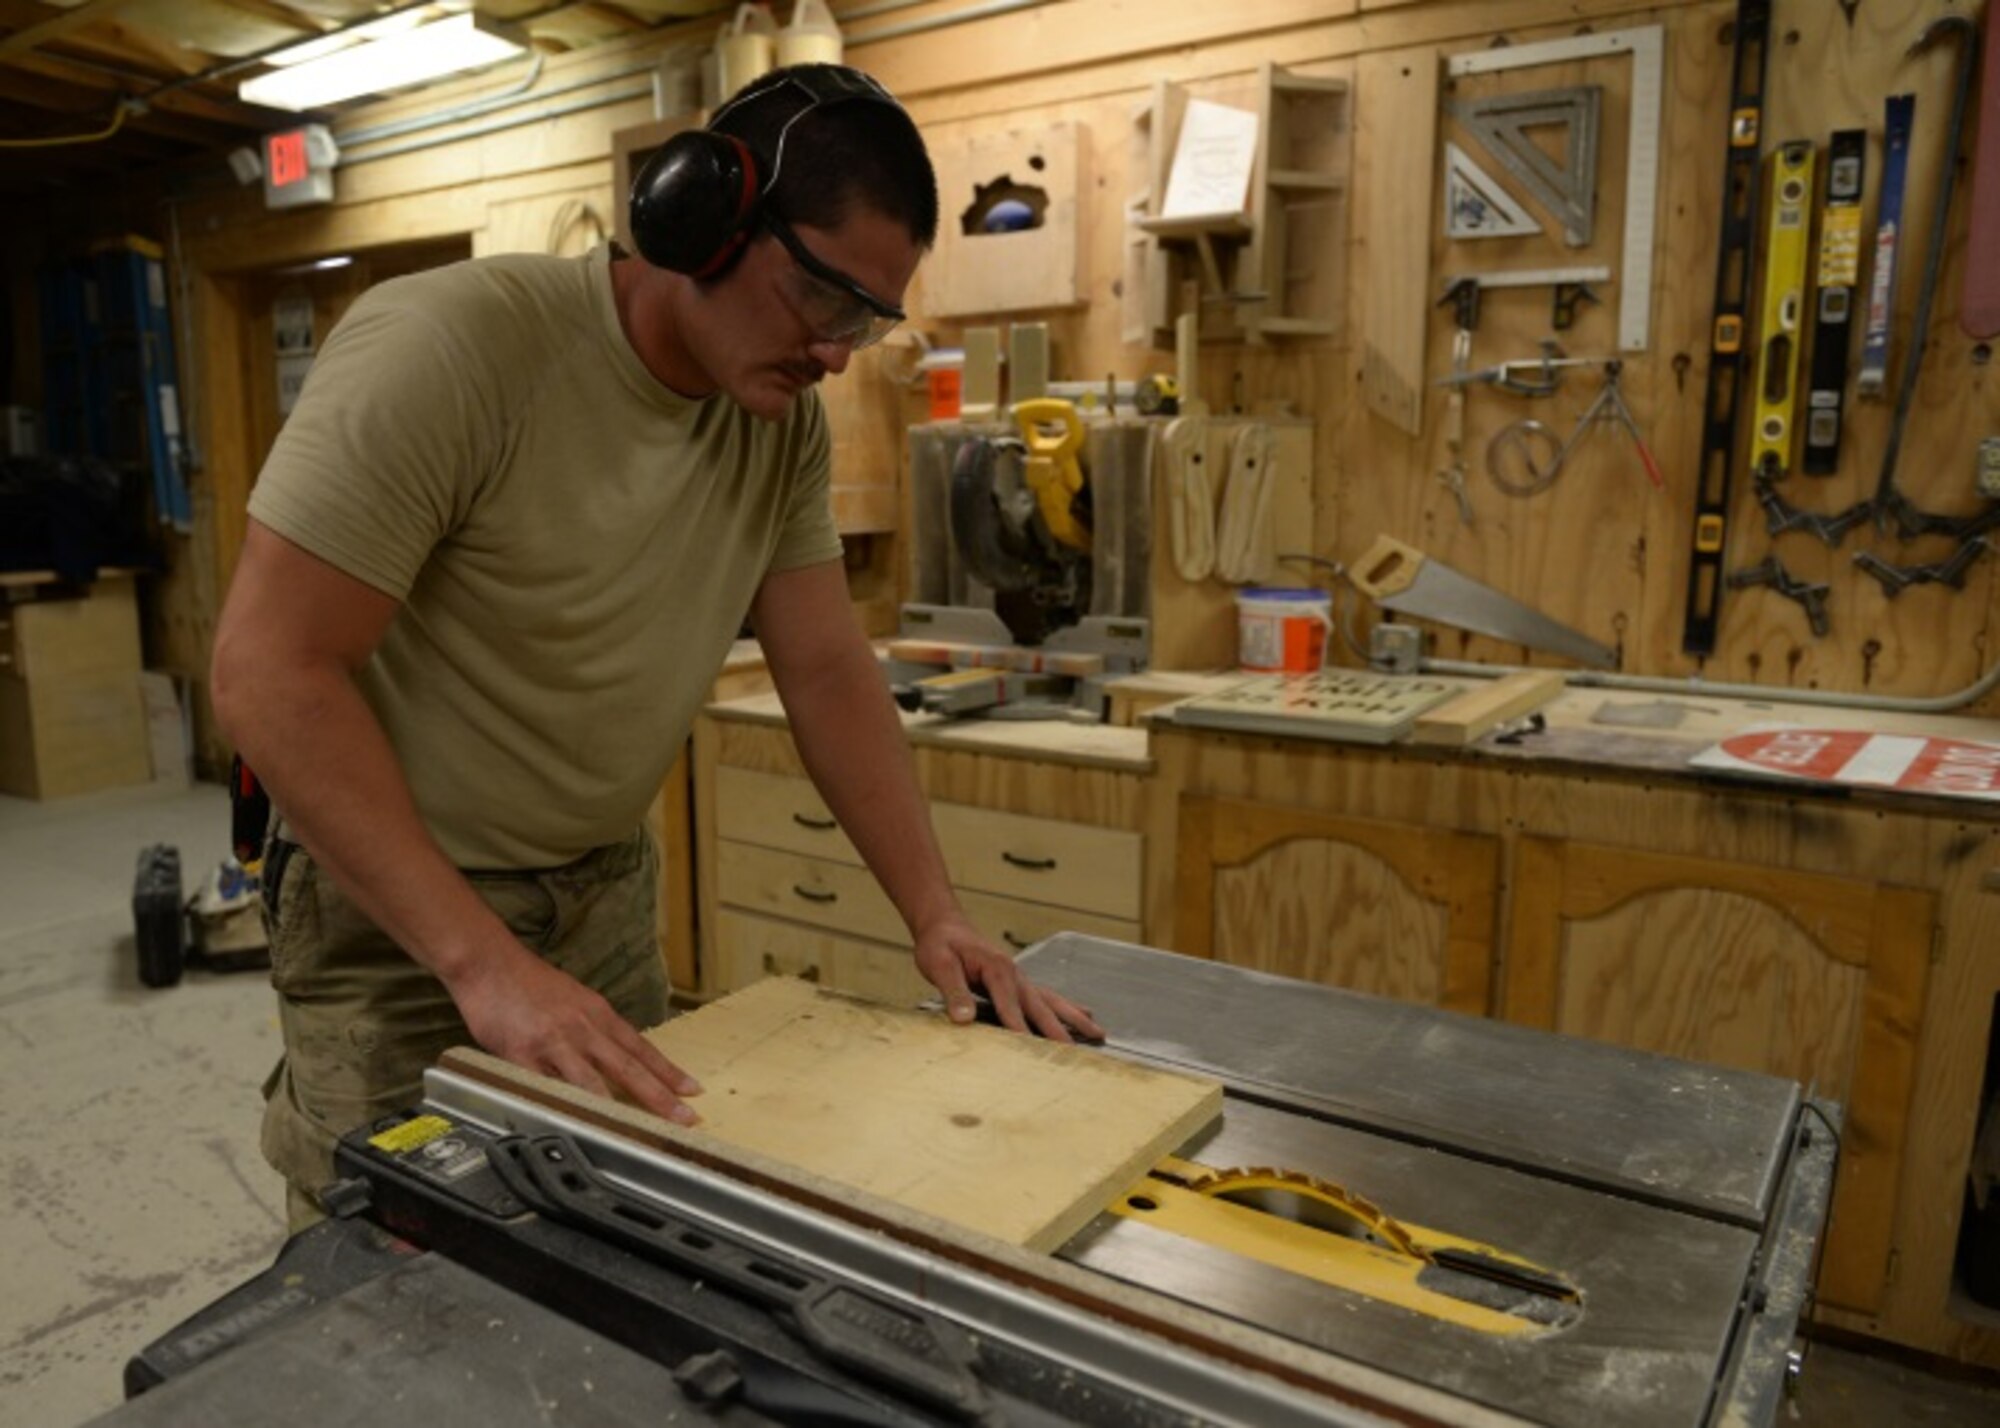 U.S. Air Force Senior Airman Carl Vanlandingham, 455th Expeditionary Civil Engineer Squadron structural journeyman, works on a project July 16, 2015, at Bagram Airfield, Afghanistan. Vanlandingham builds various projects during duty and on his days off to support the mission here. (U.S. Air Force photo by Senior Airman Cierra Presentado/Released)